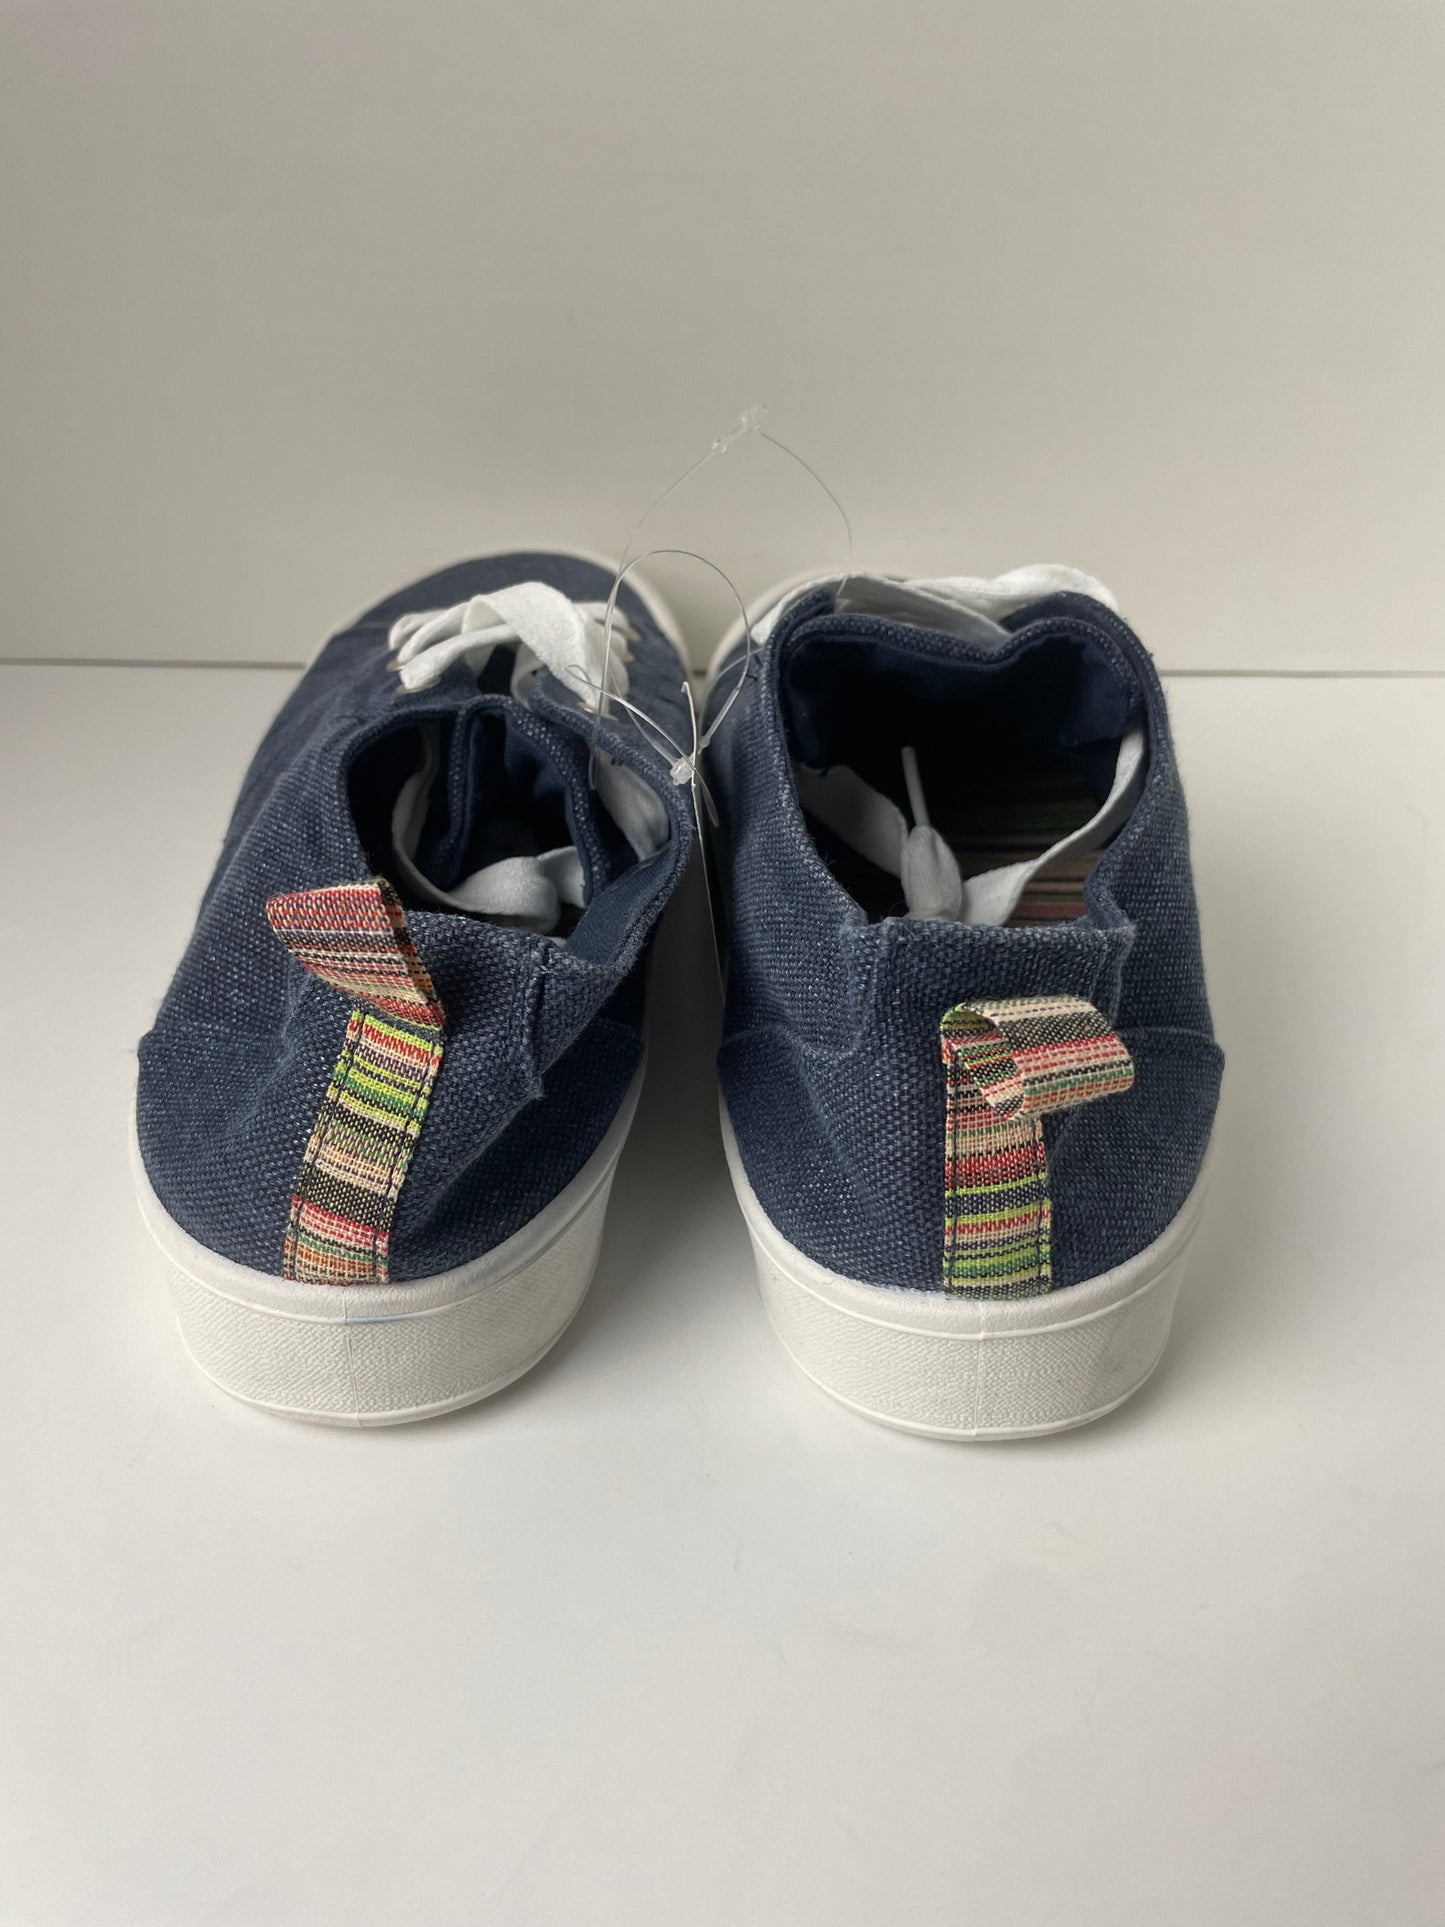 Blue Shoes Sneakers Maurices, Size 11